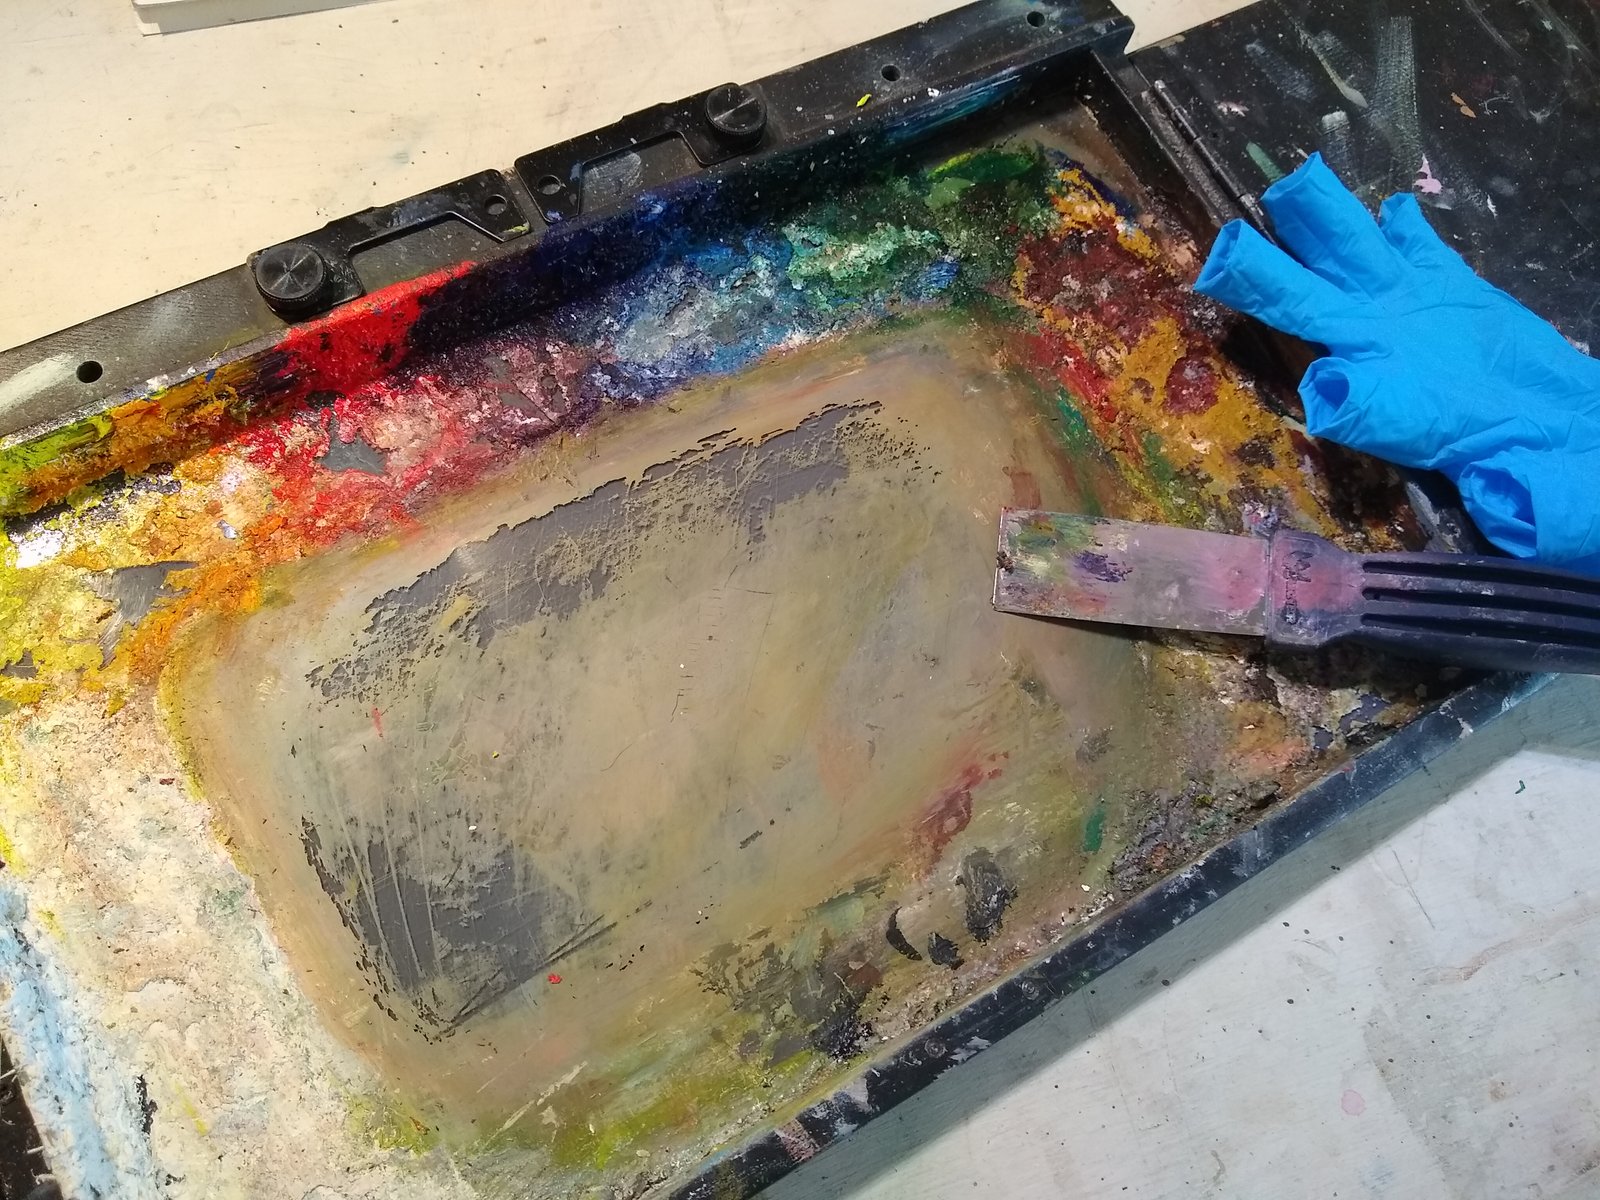 How to clean dried paint off your glass palette in 10 minutes. Supplie